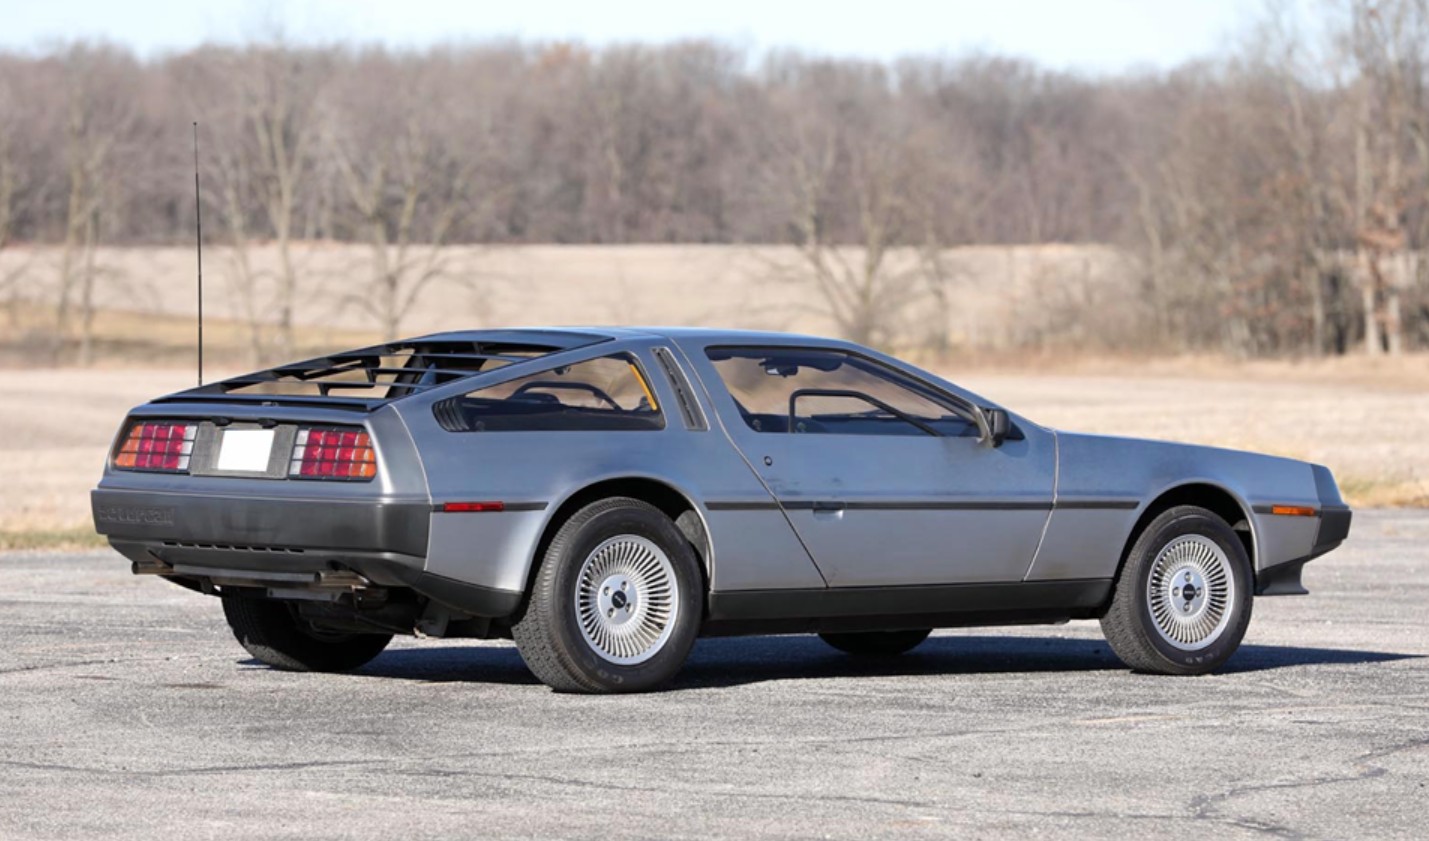 Back to the Future, DeLorean widow sues for royalties from ‘Back to the Future’ films, ClassicCars.com Journal